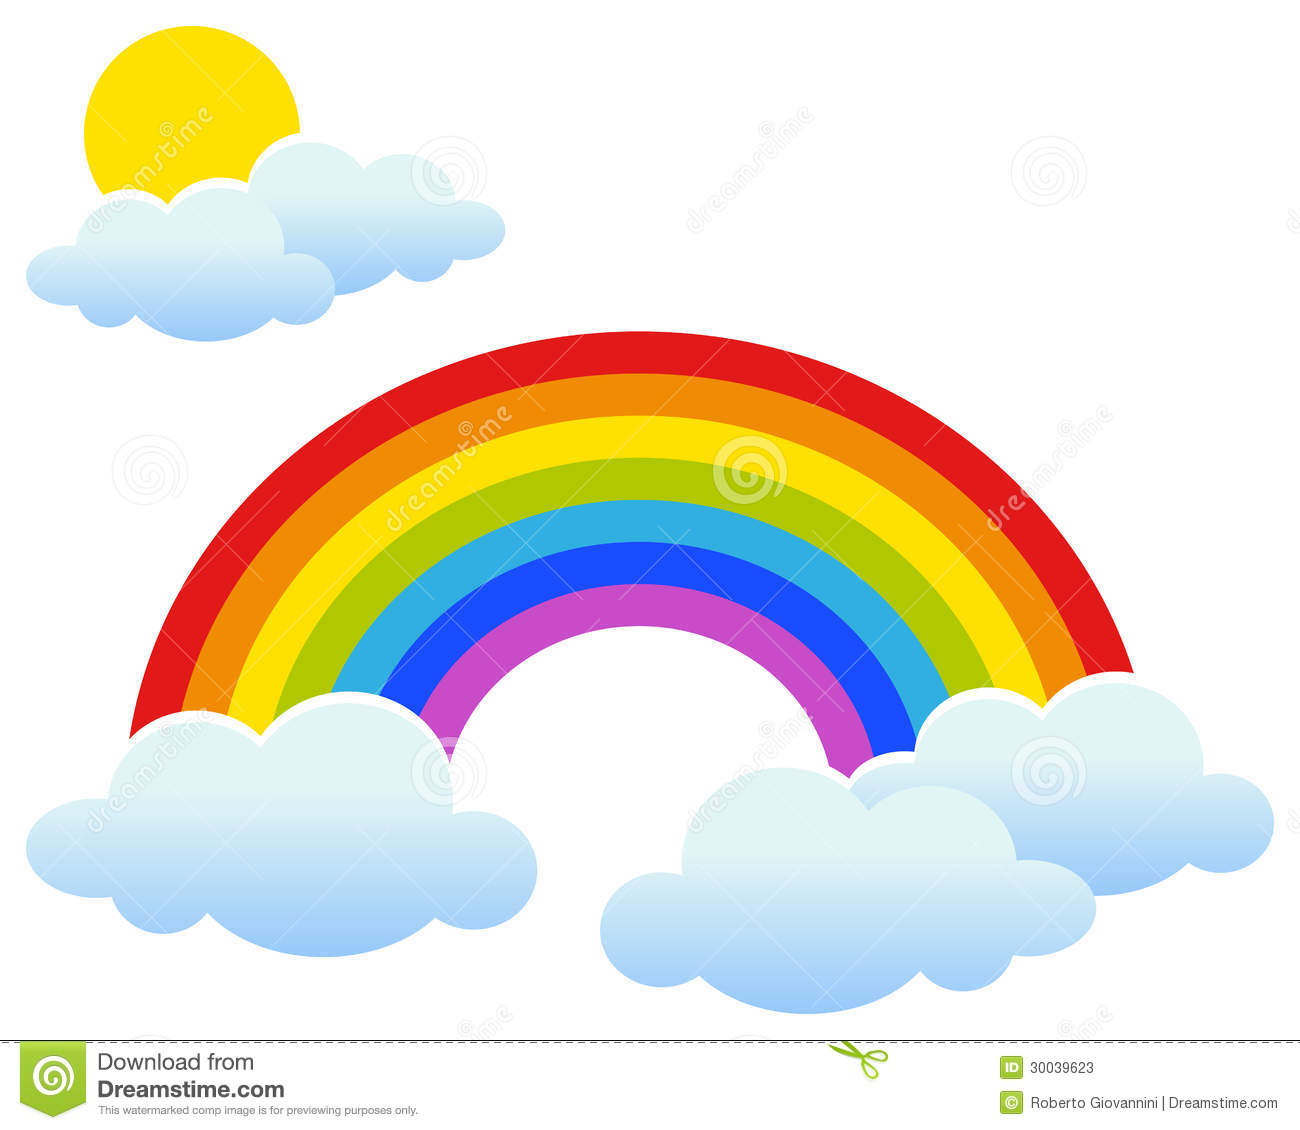 Rainbow And Sun Clipart   Clipart Panda   Free Clipart Images